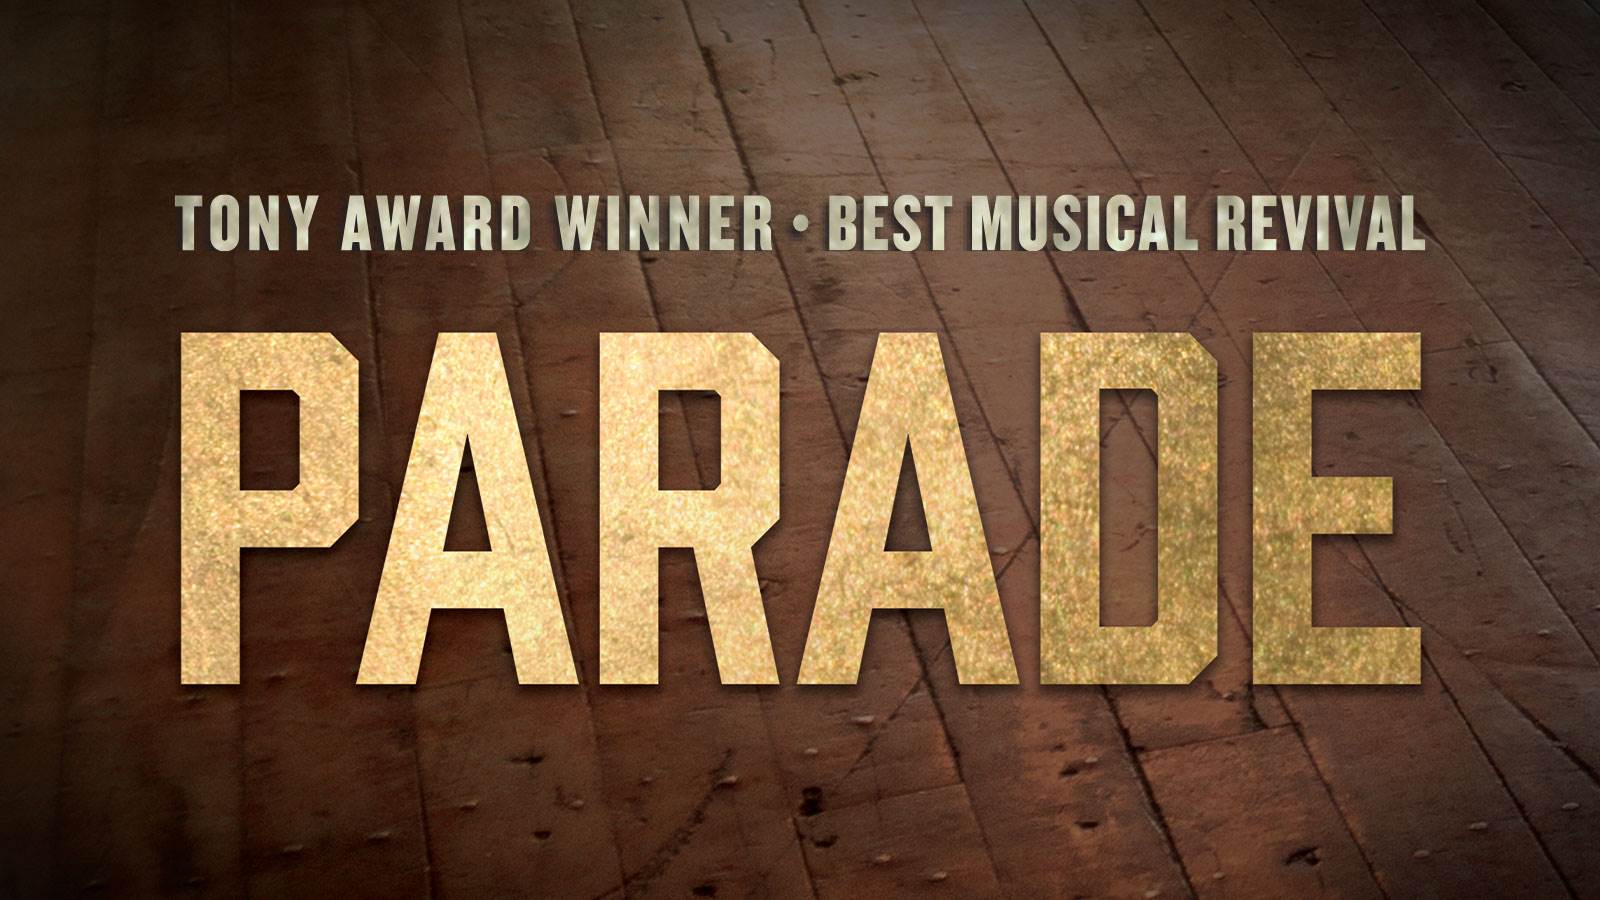 The word "Parade" in a large gold san serif font is in the middle of the photo. In much smaller font above it is "Tony Award Winner, Best Musical Revival". The background is a old dirty brown wood floor. 